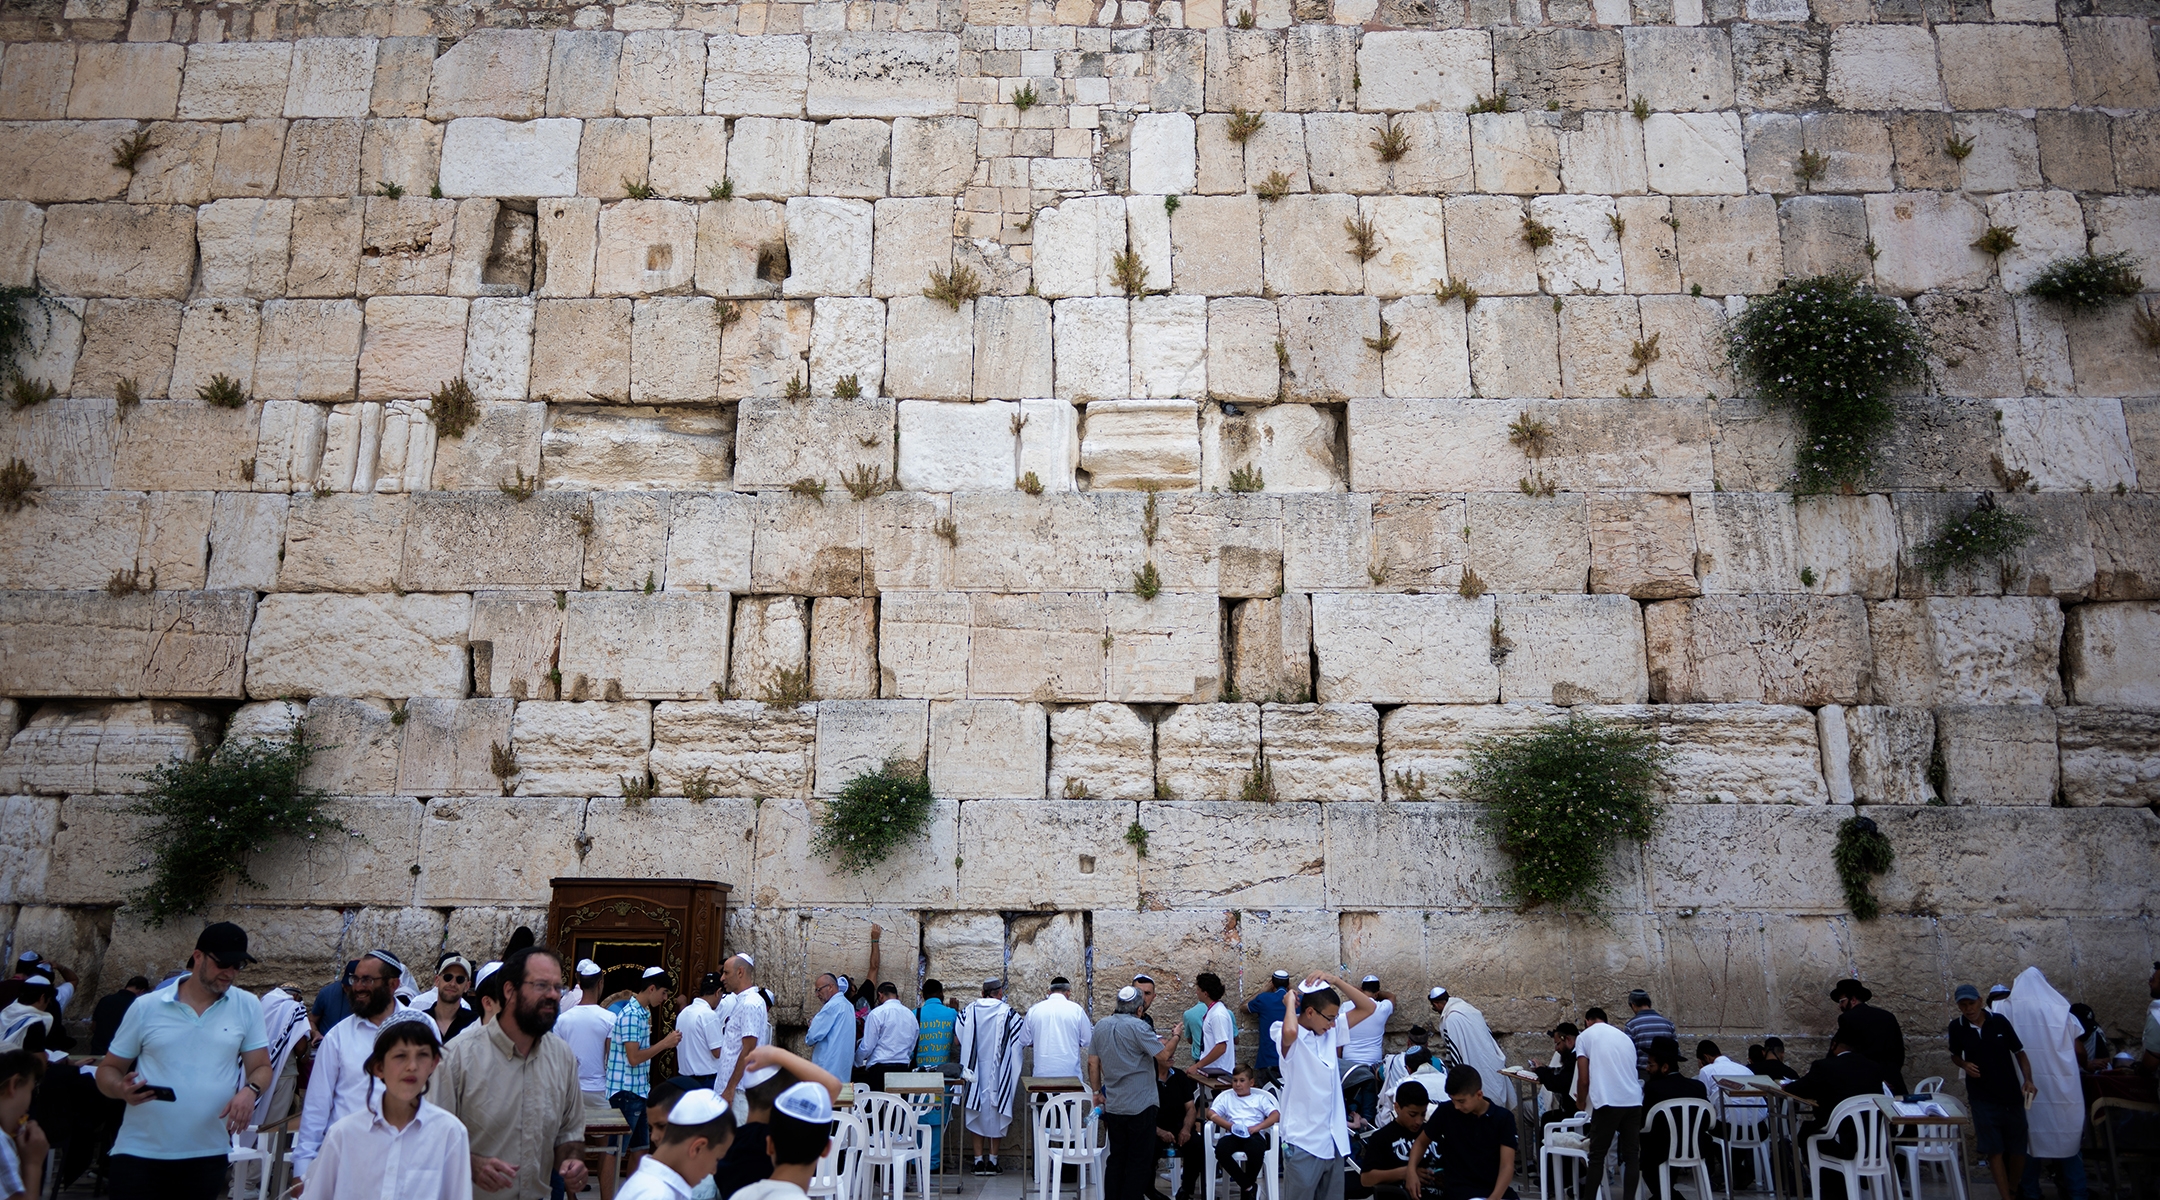 Jewish worshipers pray at the Western Wall in the Old City of Jerusalem, June 13, 2022. 